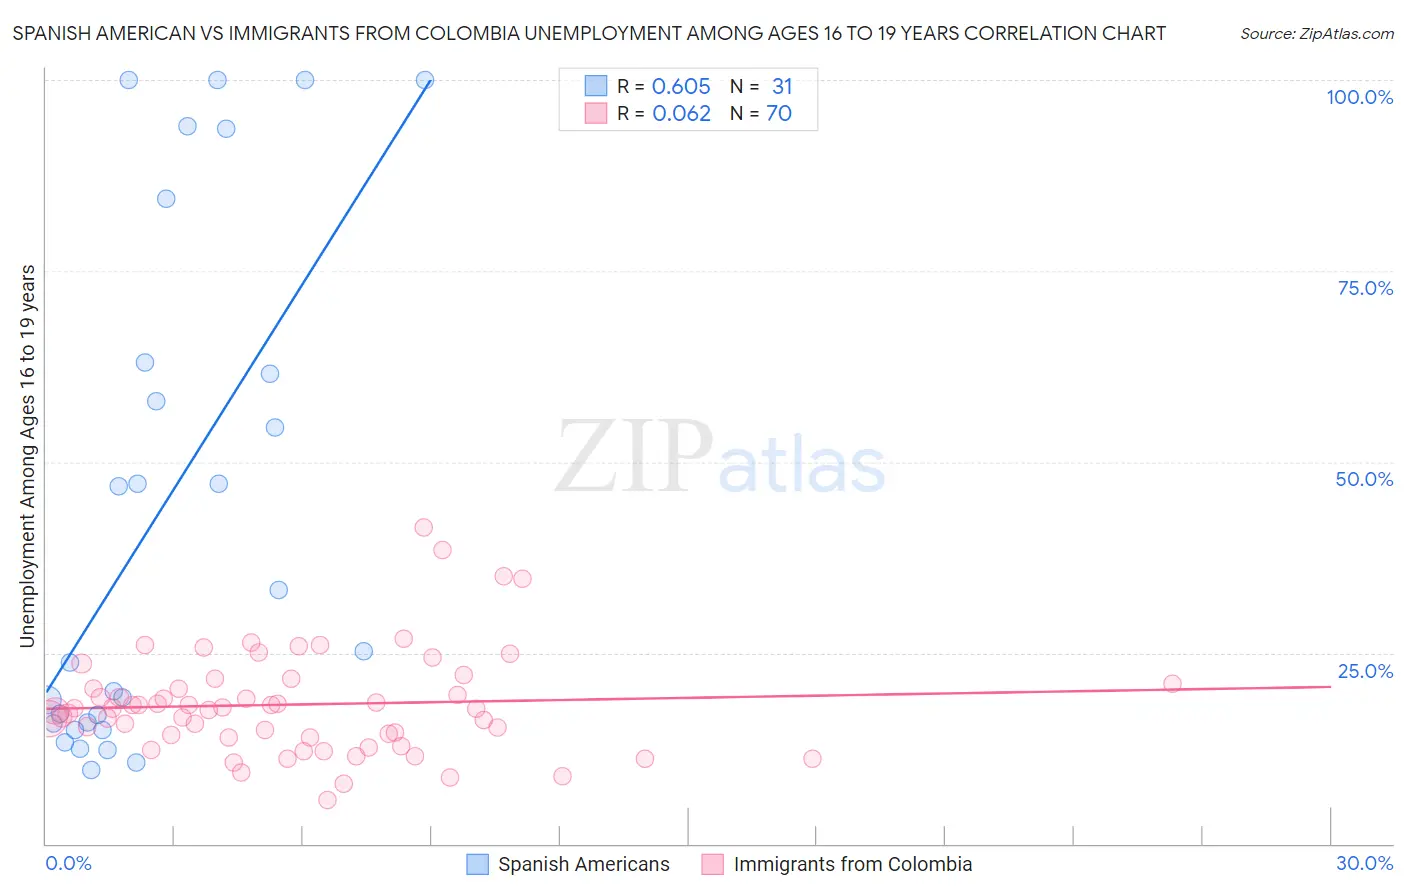 Spanish American vs Immigrants from Colombia Unemployment Among Ages 16 to 19 years